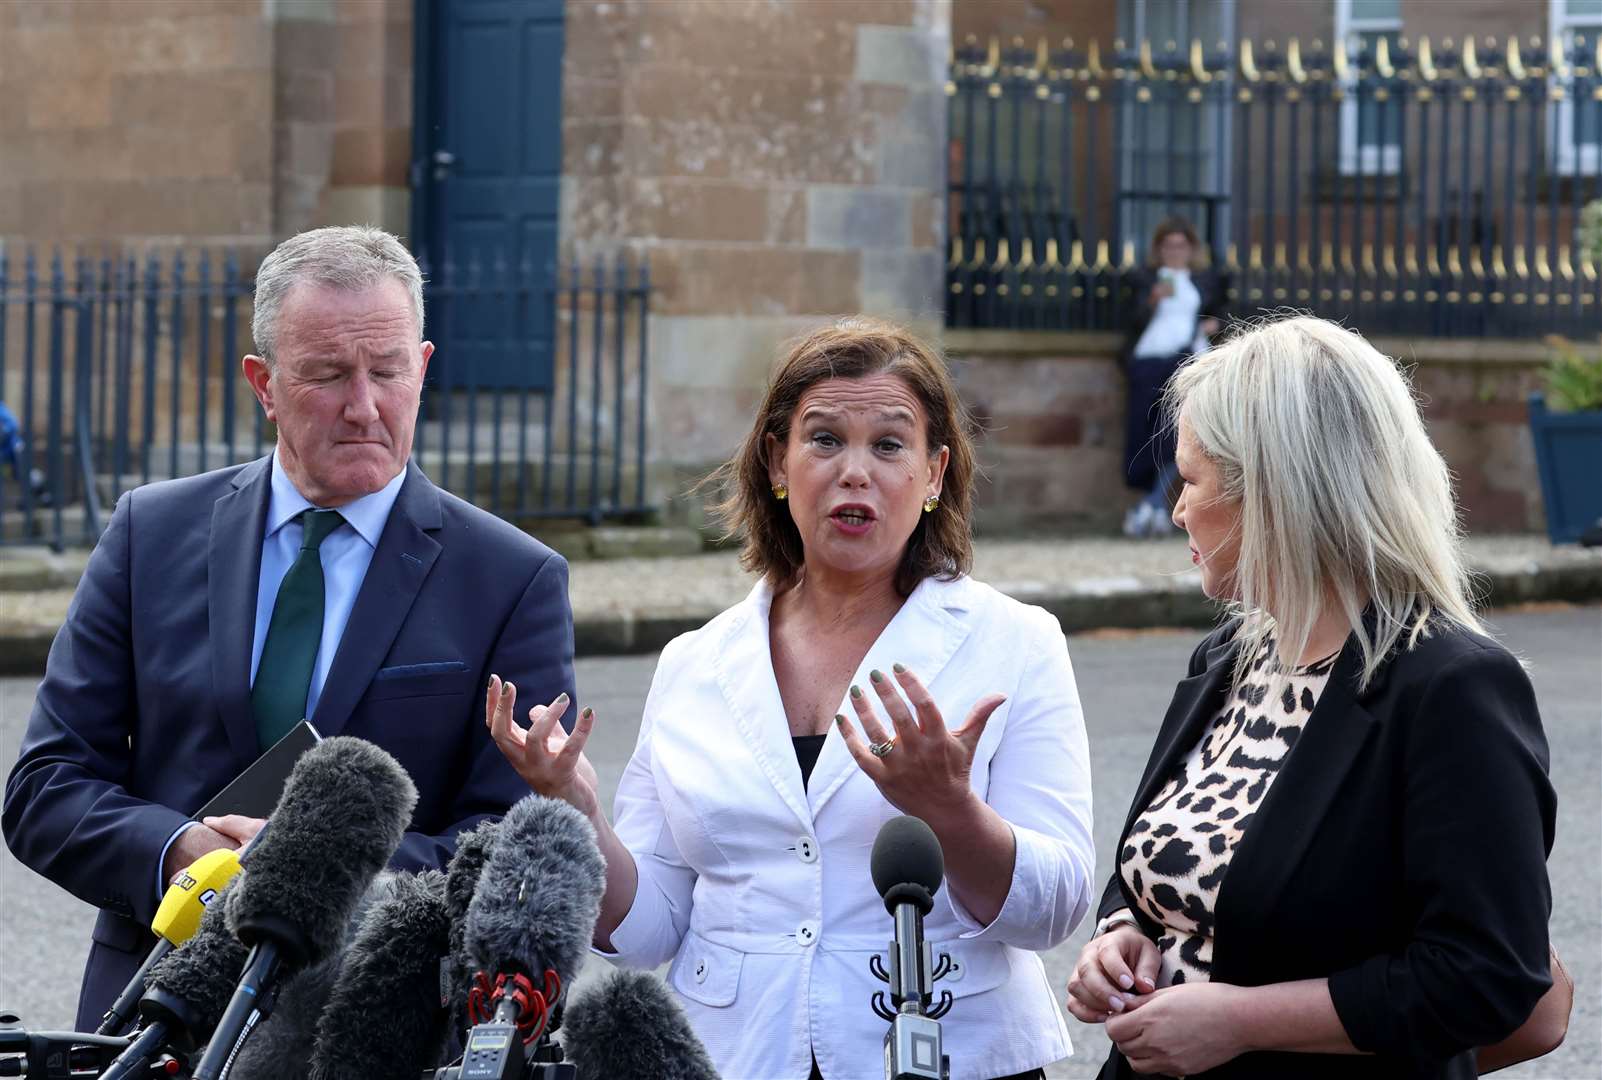 Mary Lou McDonald (centre), speaks to the media alongside Conor Murphy and Michelle O’Neill after their meeting with Prime Minister Boris Johnson at Hillsborough Castle (Liam McBurney/PA)